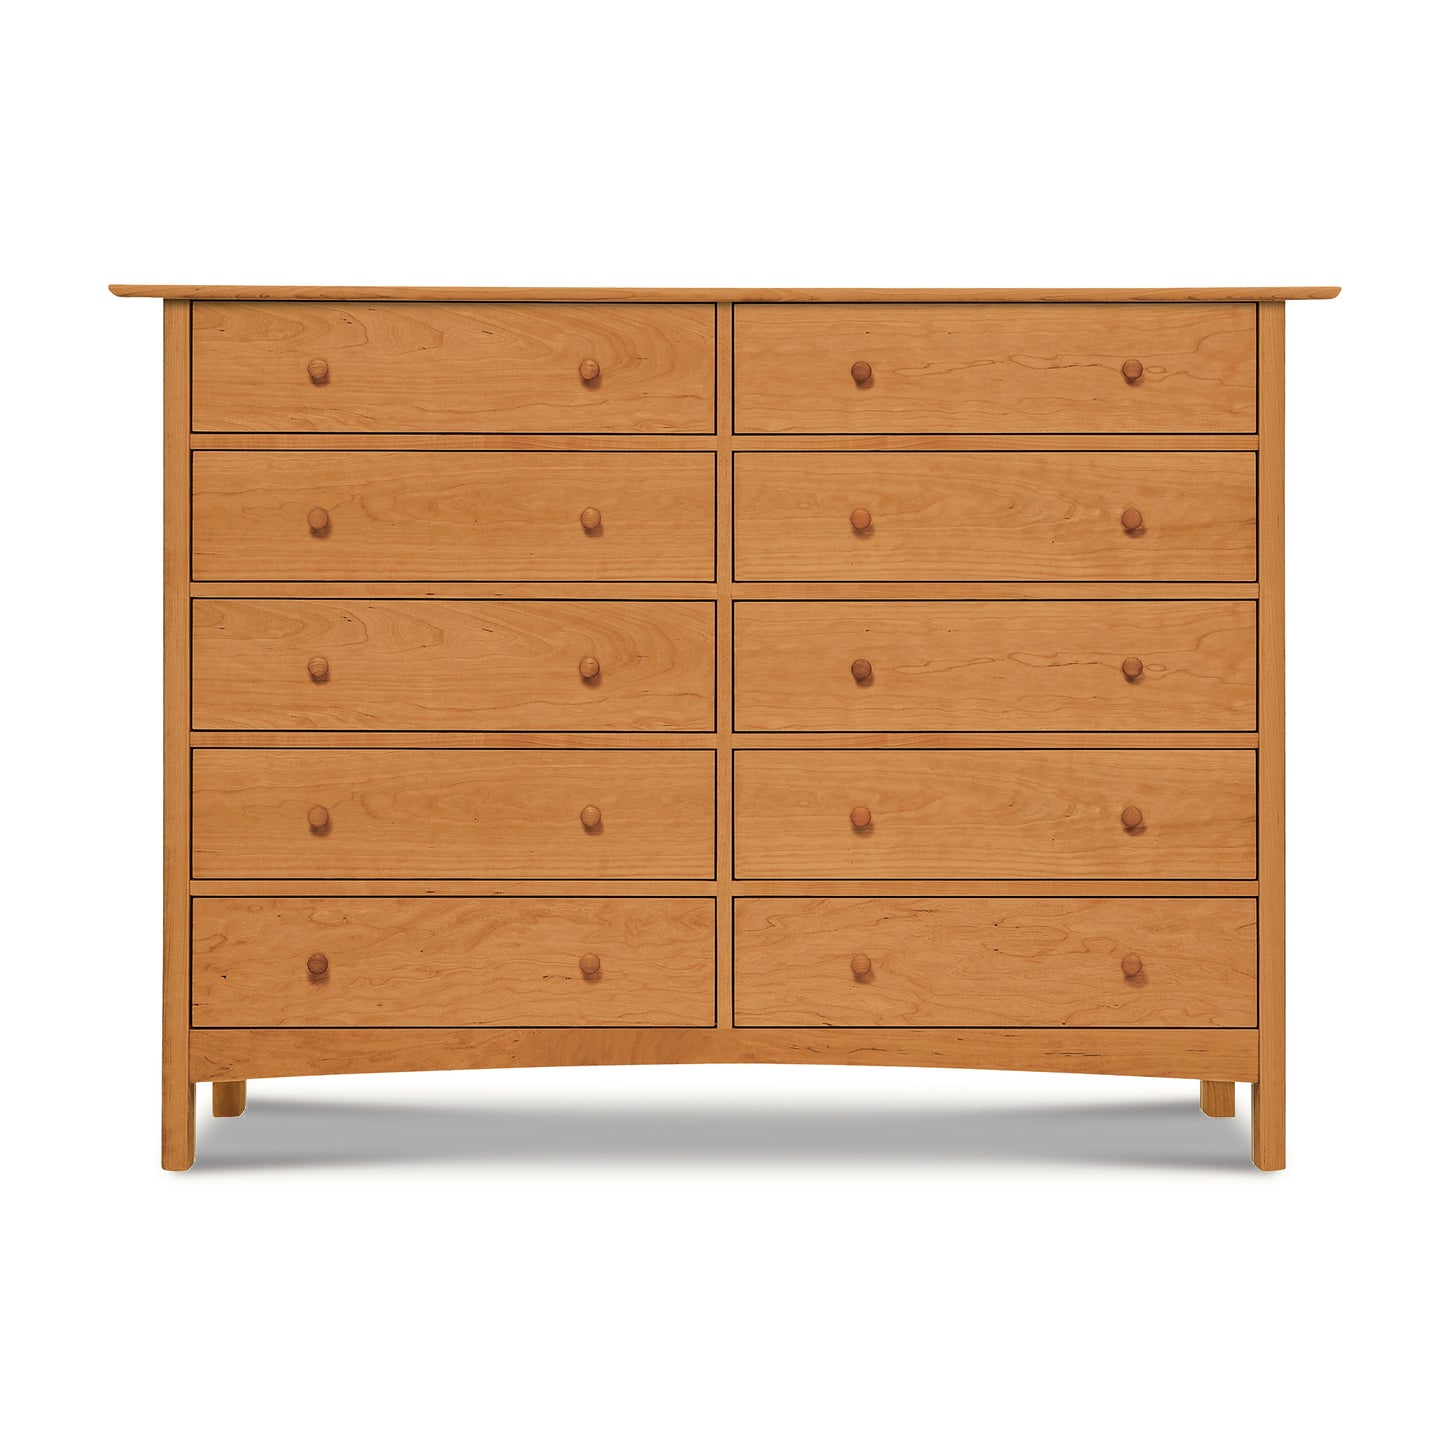 A high-quality Heartwood Shaker 10-Drawer Dresser made by Vermont Furniture Designs, displayed on a white background.